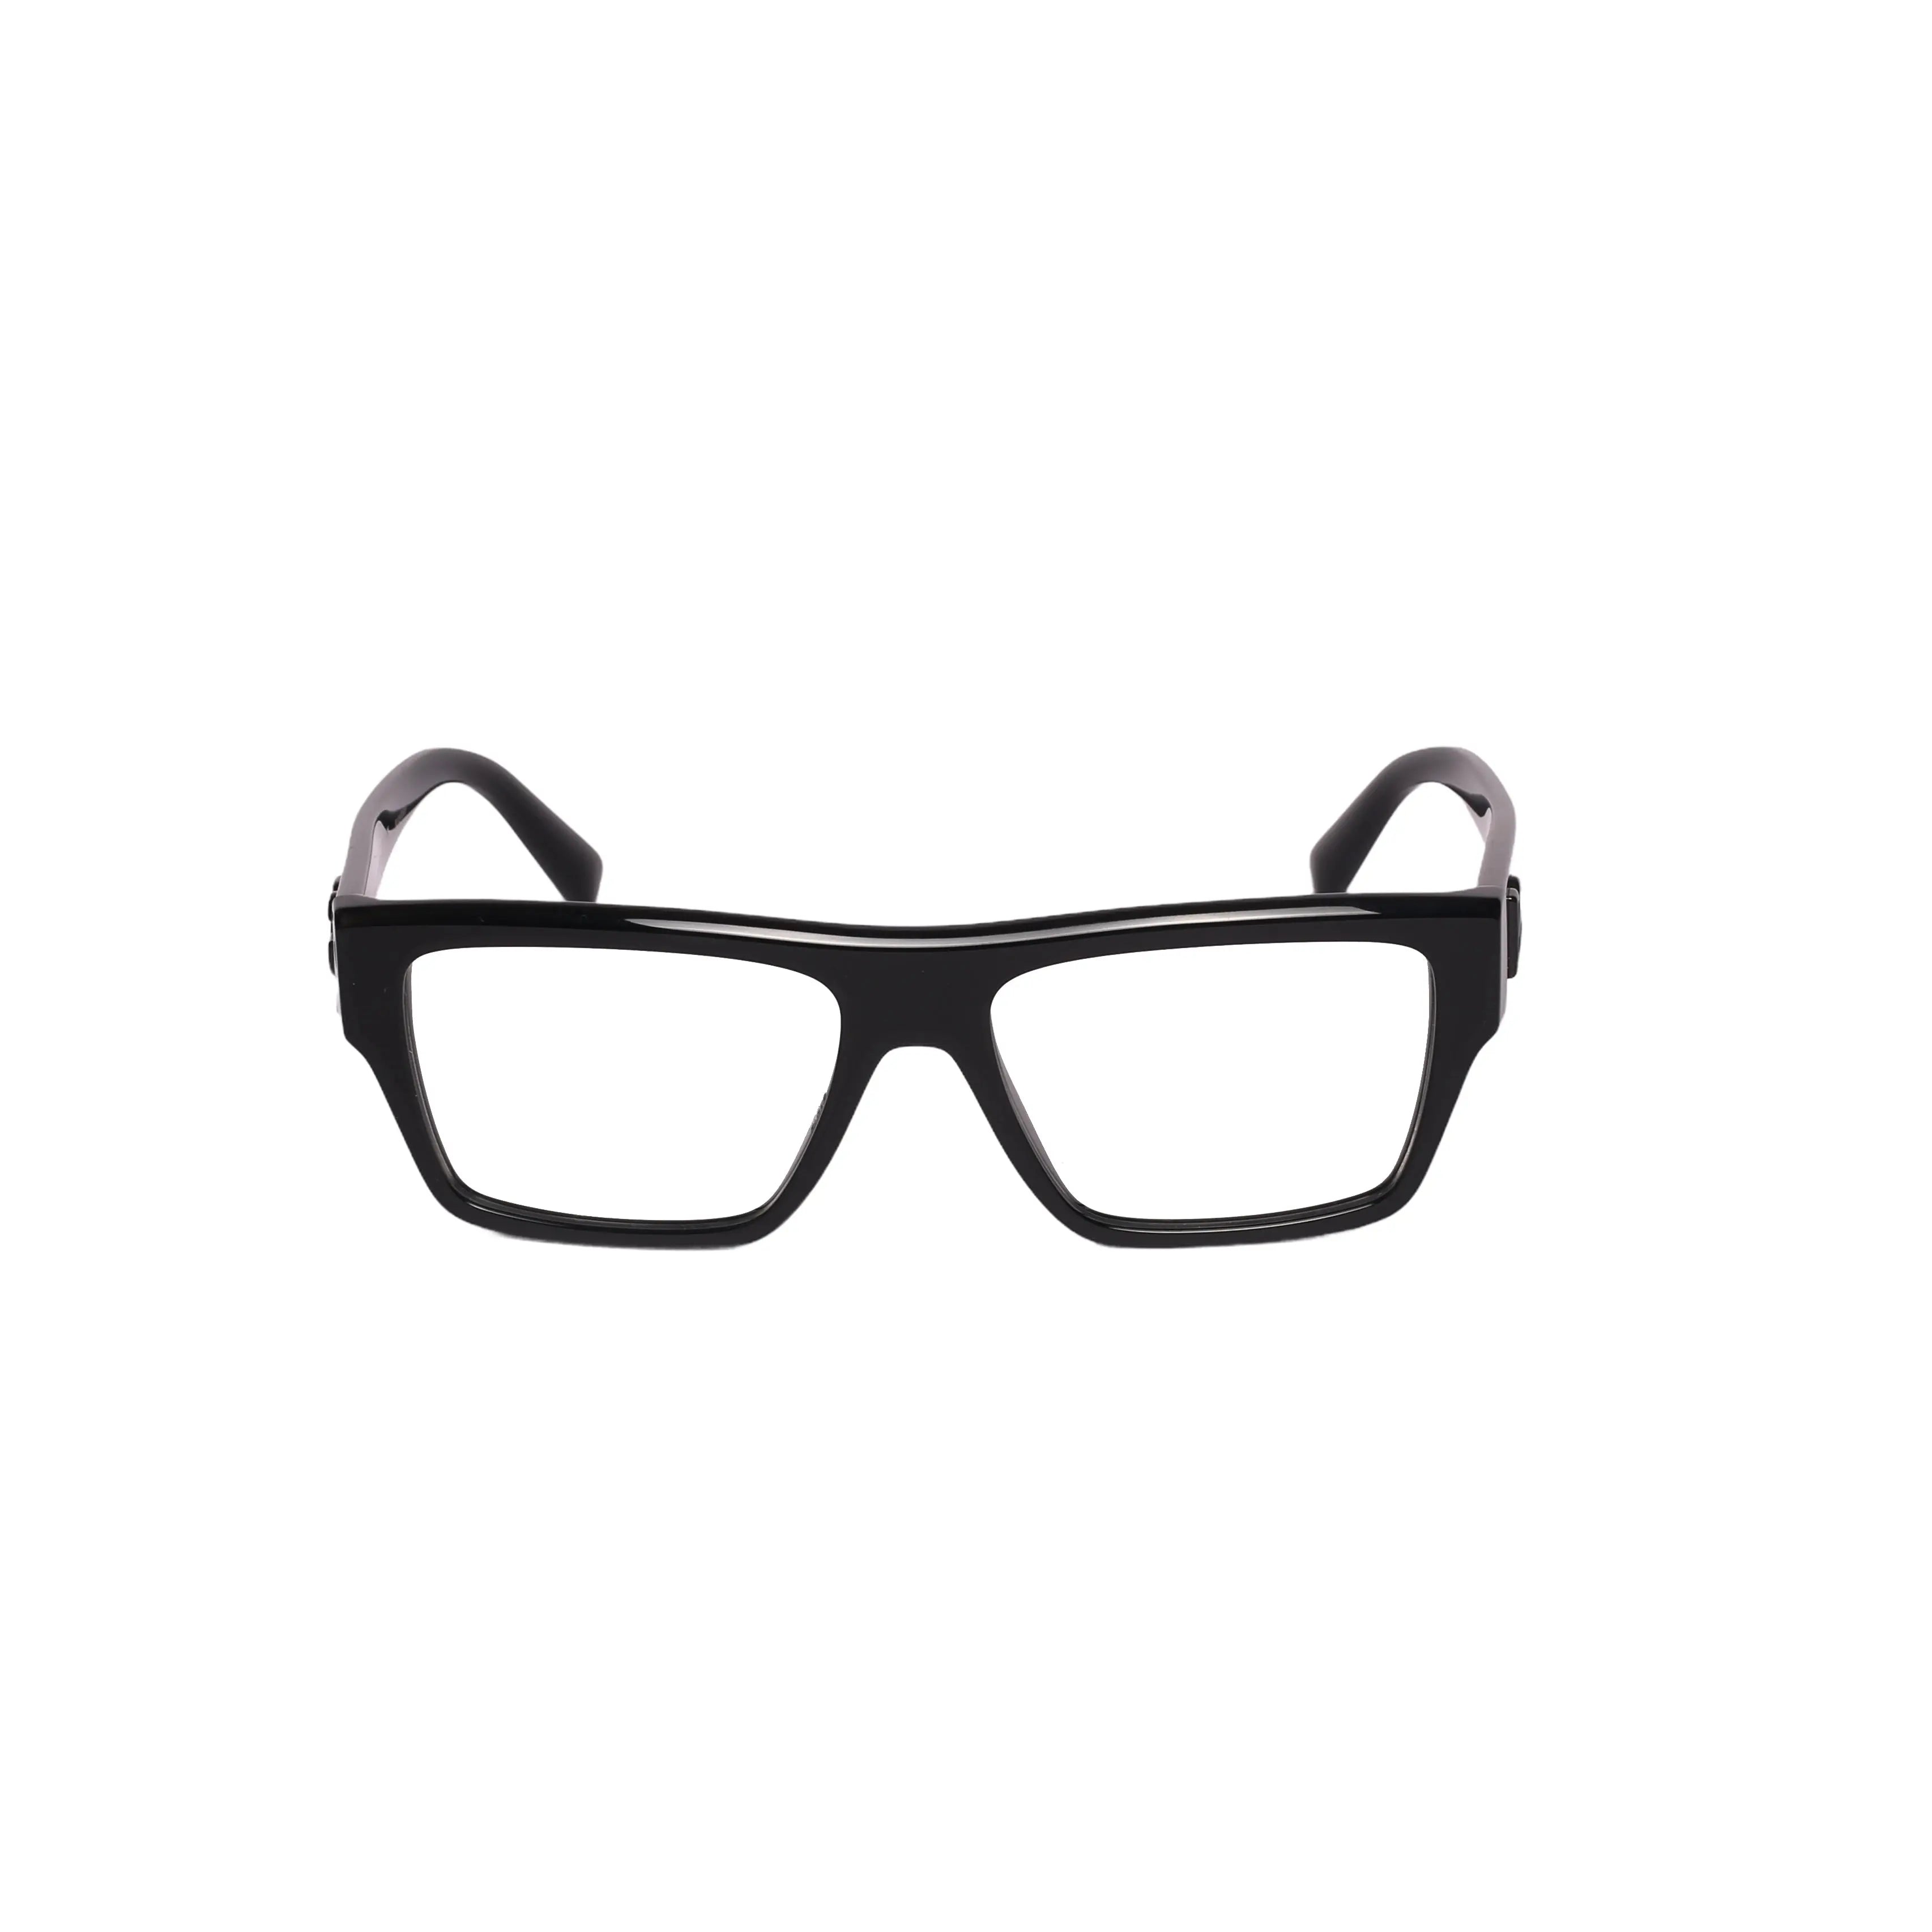 Dolce & Gabbana (D&G) DG 3382-53-5015 EyeglassesLook and feel remarkable in Dolce &amp; Gabbana's DG 3382-53-5015 eyeglasses. This stylish frame is perfect for a confident expression and will make you stand out frEyeglasses